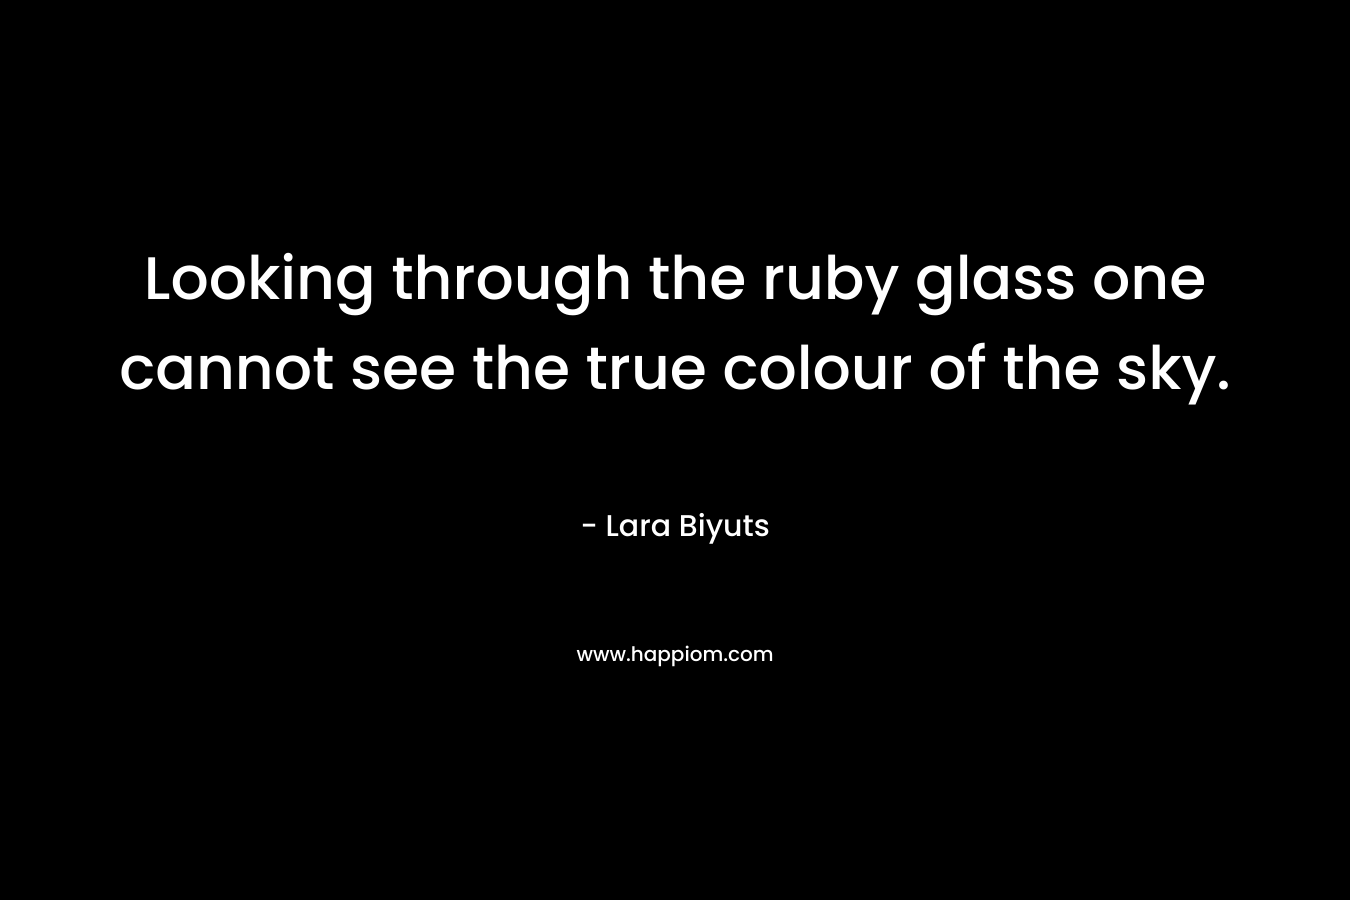 Looking through the ruby glass one cannot see the true colour of the sky.